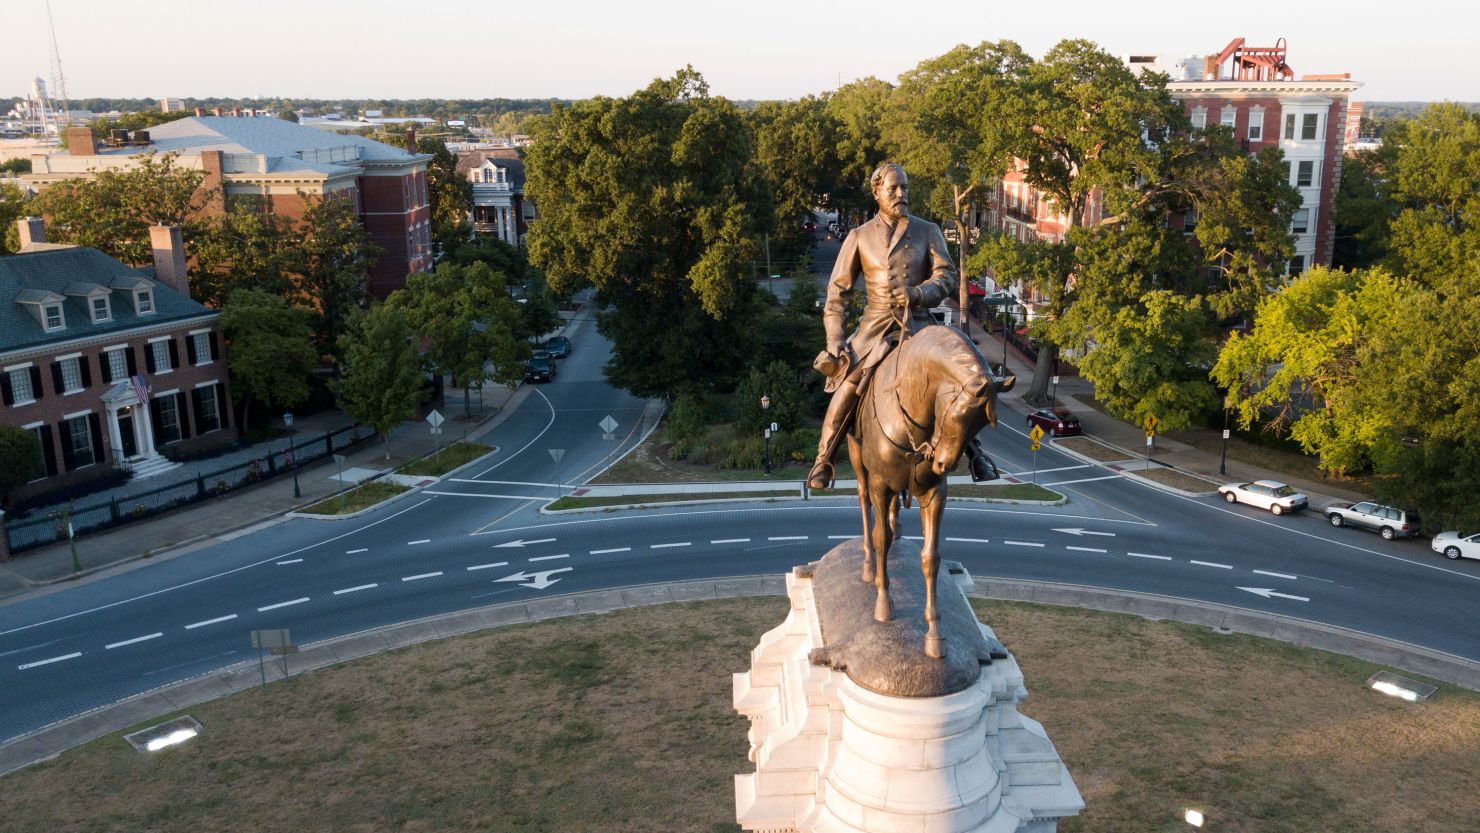 The early morning sun highlights the statue of Confederate General Robert E. Lee on Monument Avenue in Richmond, Virginia, on July 31, 2017.